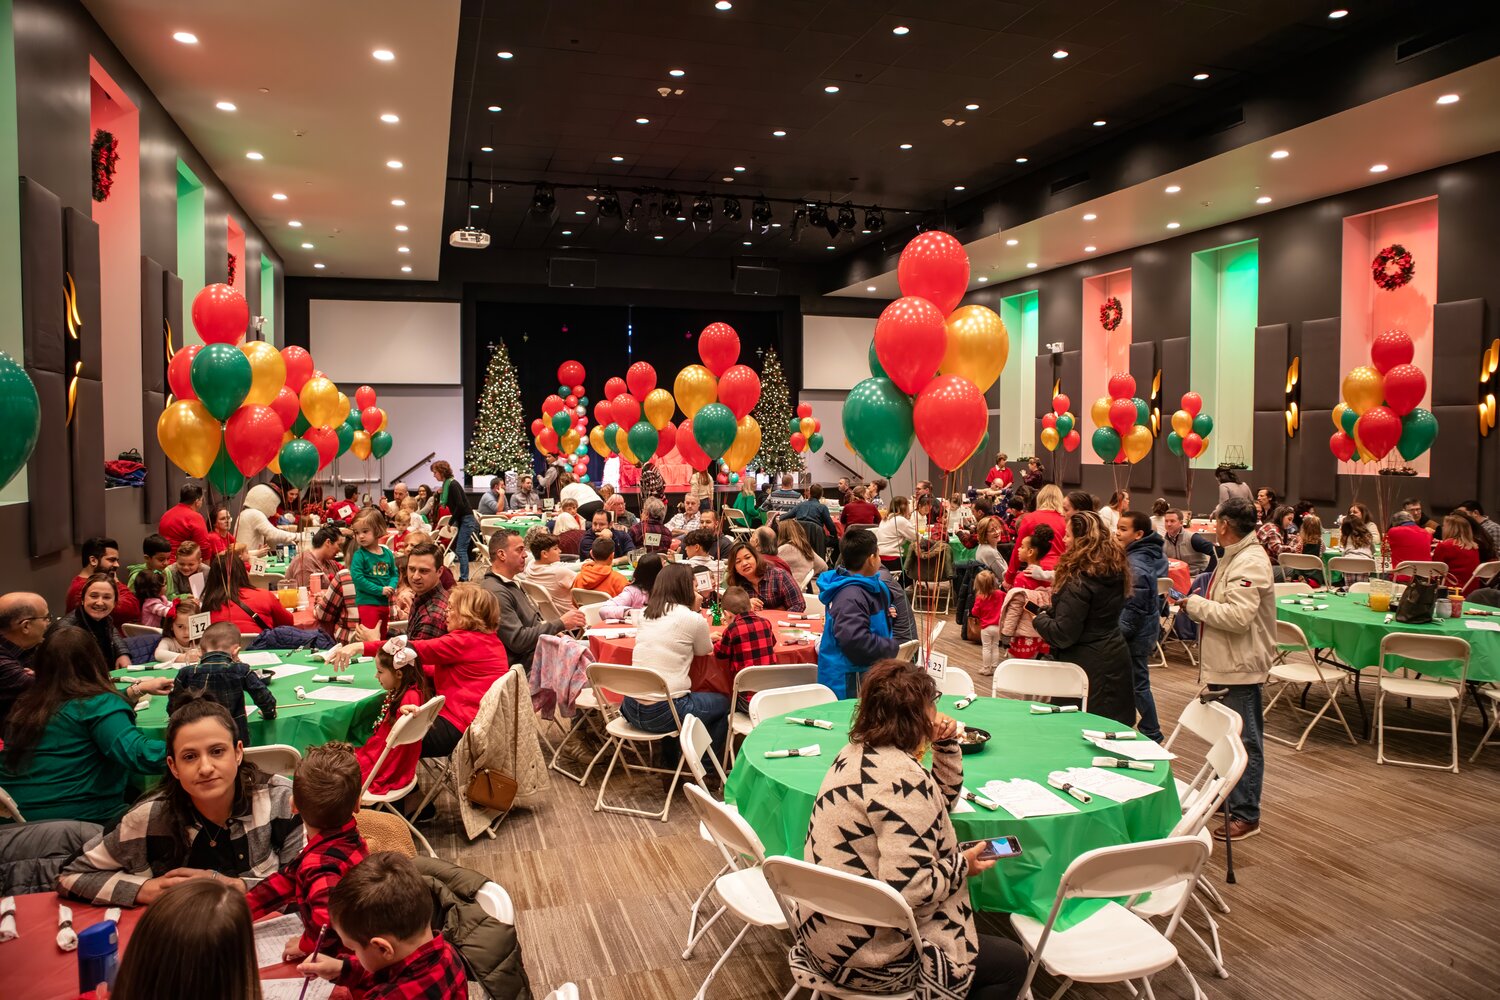 The annual ‘Breakfast with Santa’ invites families to join in holiday festivities including pictures with Santa and Mrs. Claus, writing and mailing letters to Santa, and of course, a delicious breakfast!